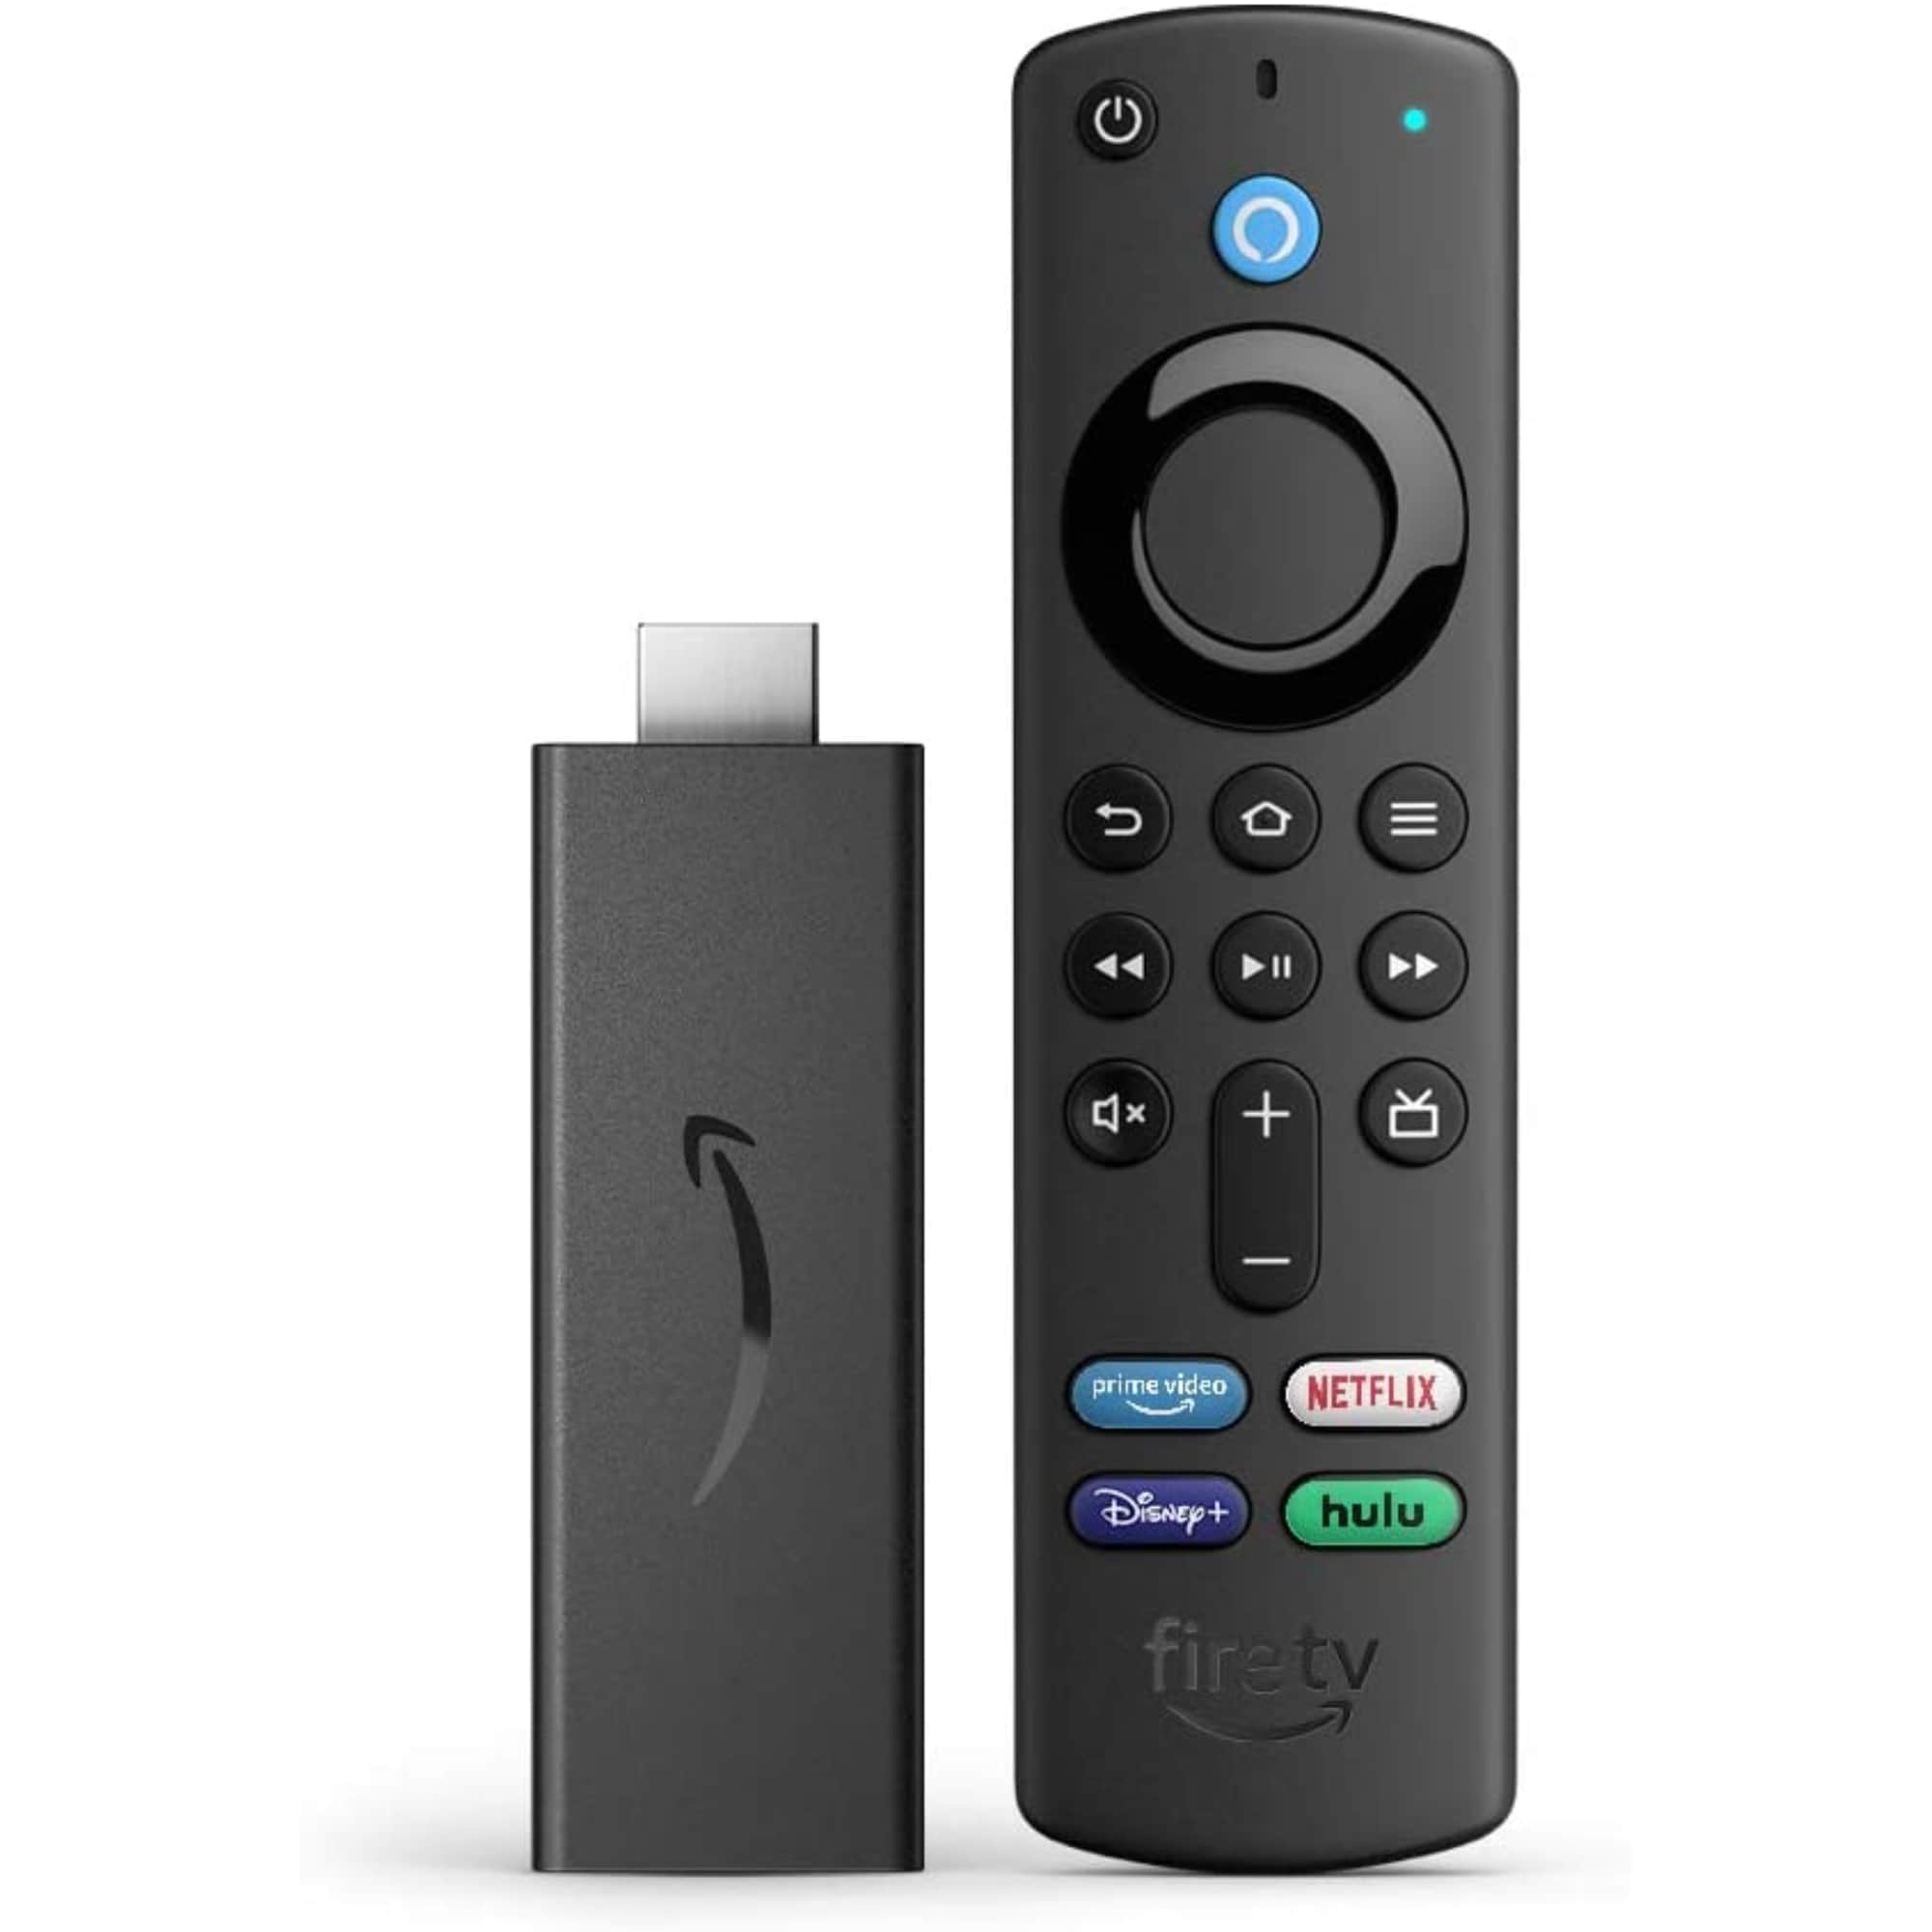 Amazon Fire TV Stick (3rd Gen) with Alexa Voice Remote for $16.99 at Lowes